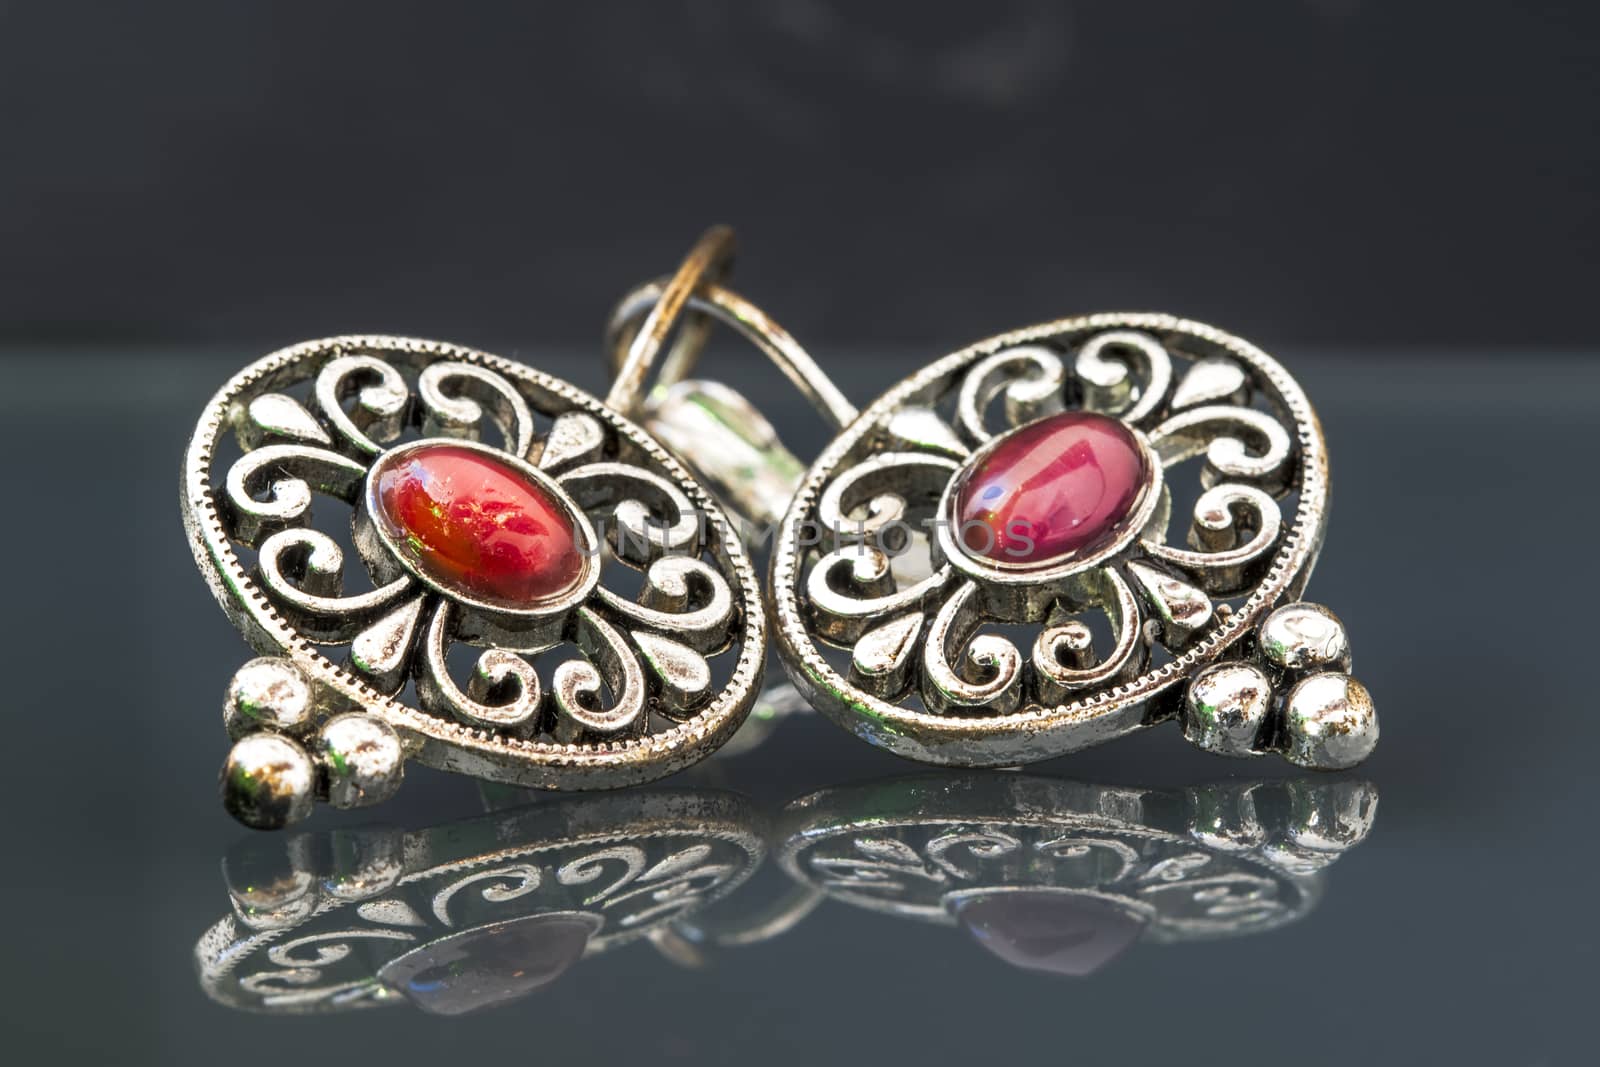 Silver earrings with red gems on dark background with beautiful reflection, close up macro shot